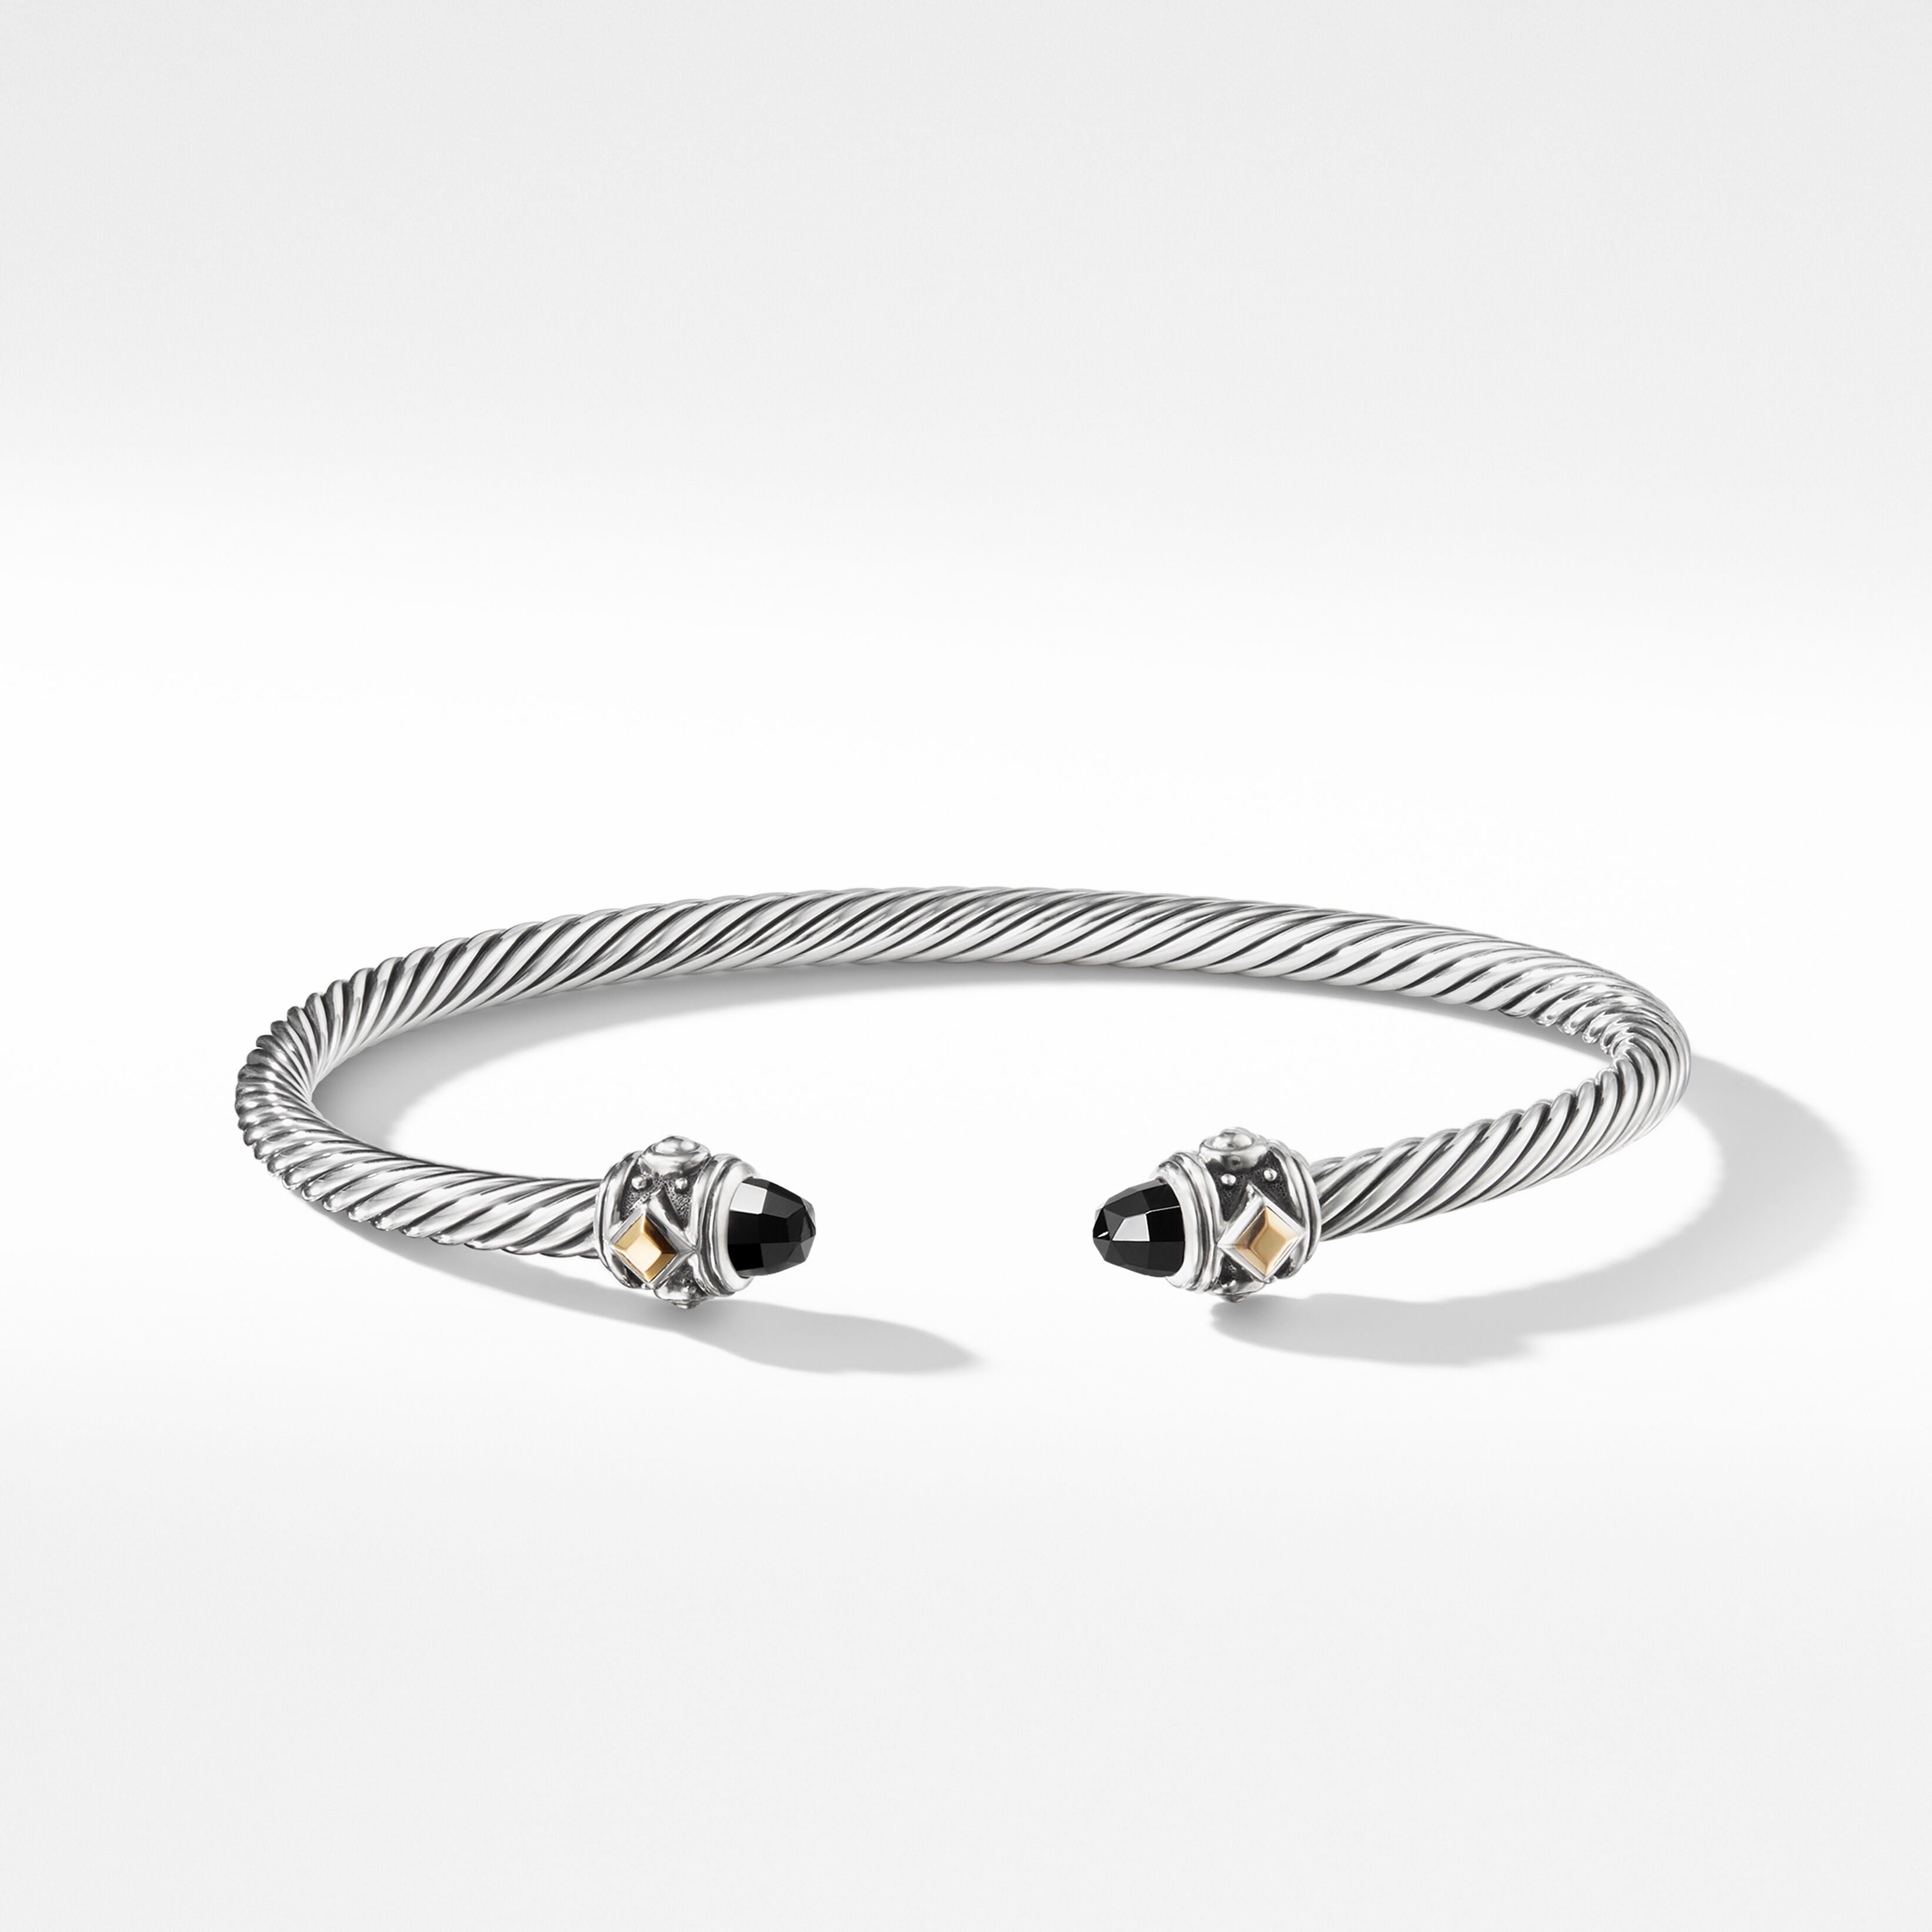 Renaissance® Bracelet in Sterling Silver with Black Onyx and 18K Yellow Gold | David Yurman